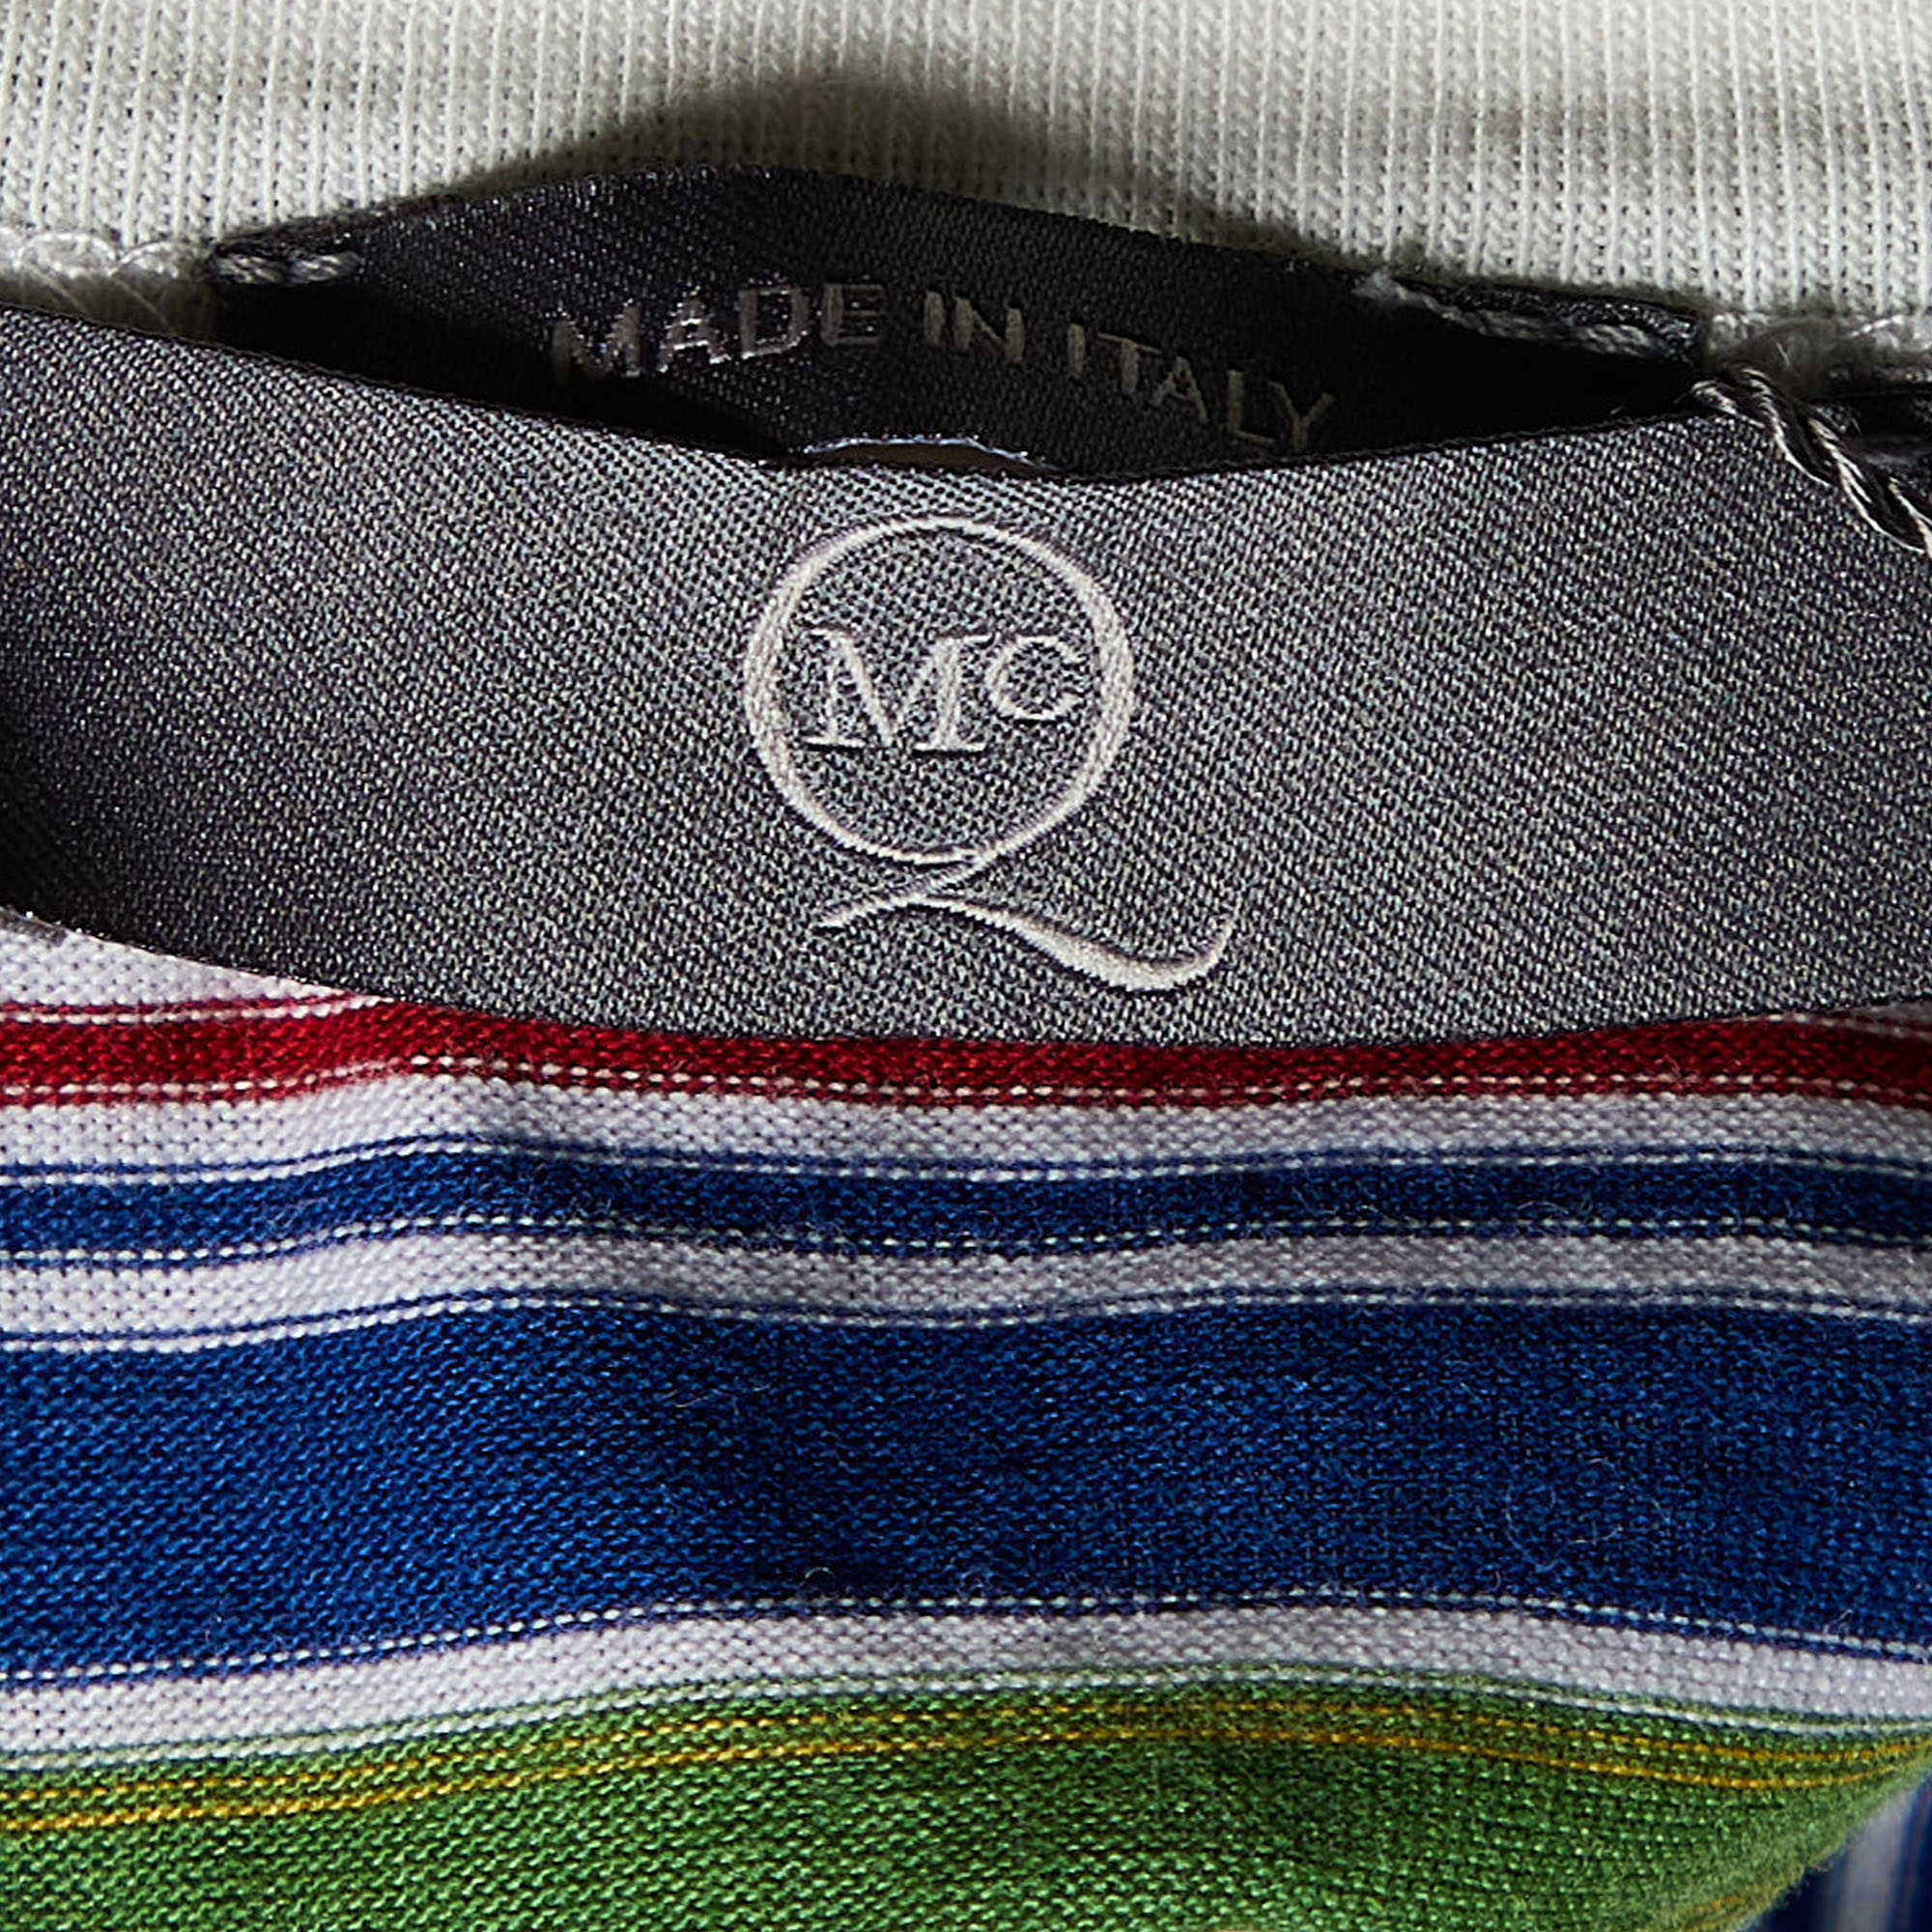 McQ By Alexander McQueen Multicolor Striped & Embroidered Tank Top M